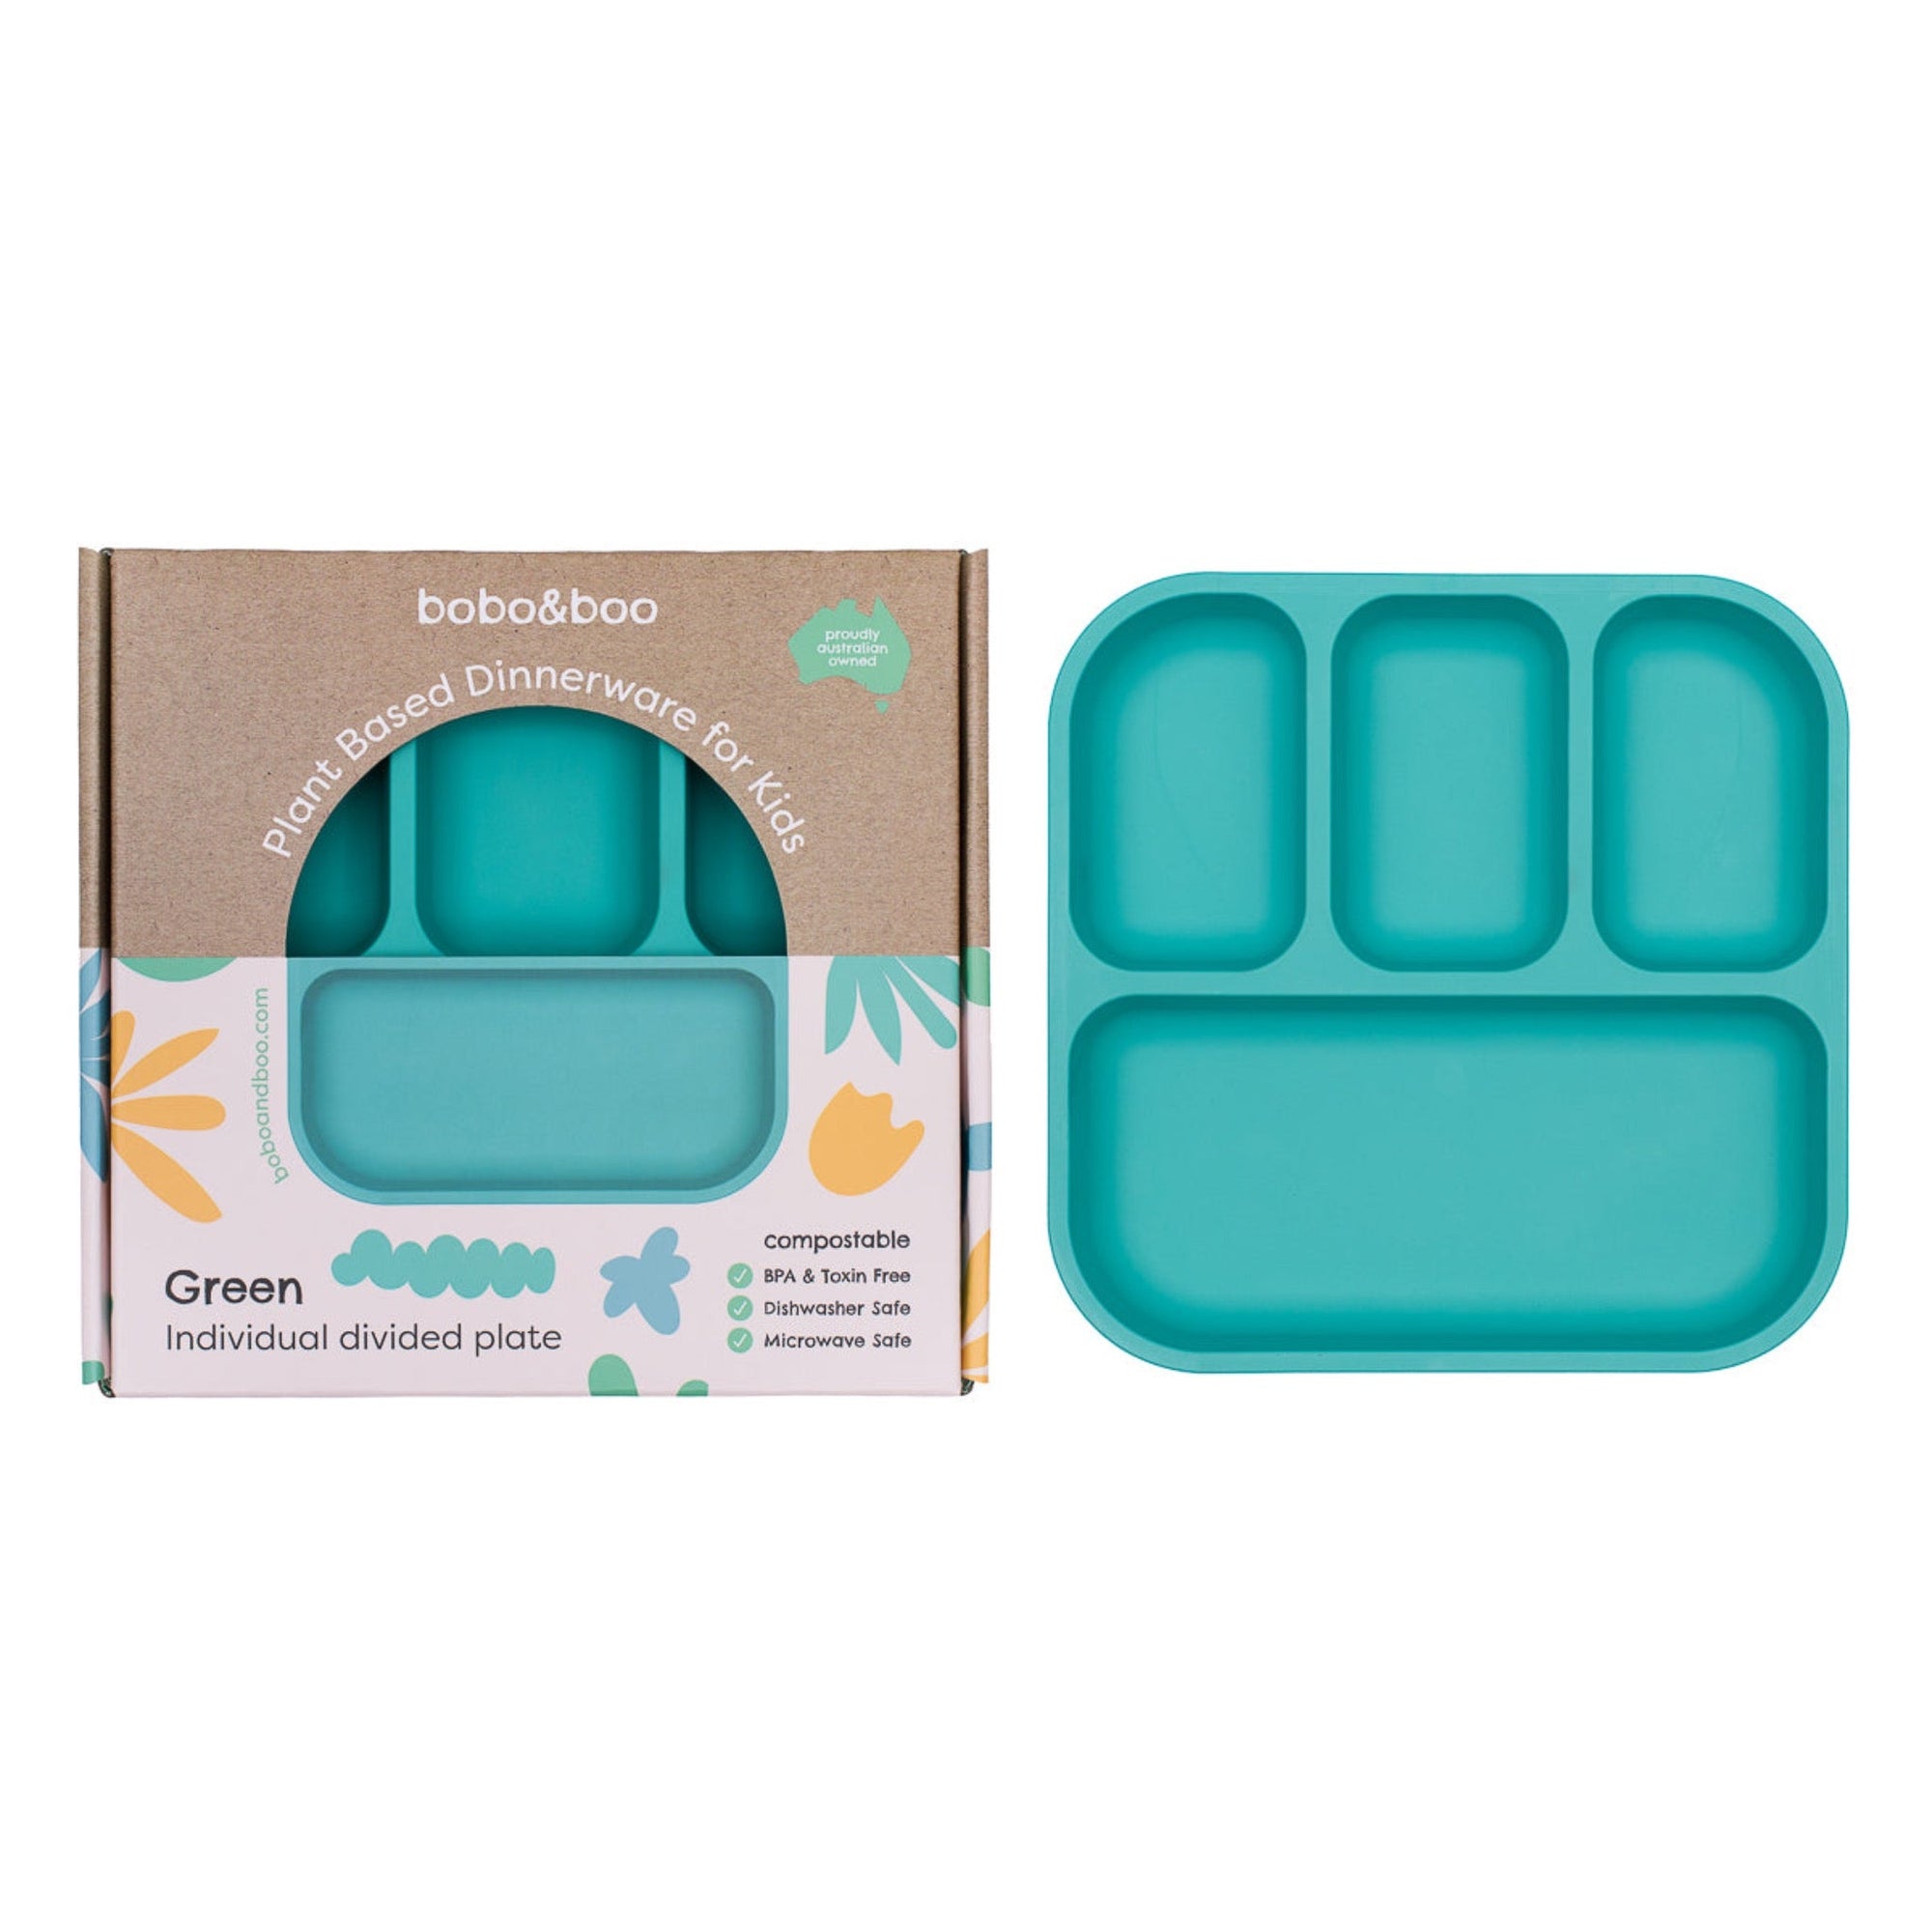 bobo&boo Plant-based bamboo divided plate featured with it's colourful gift box